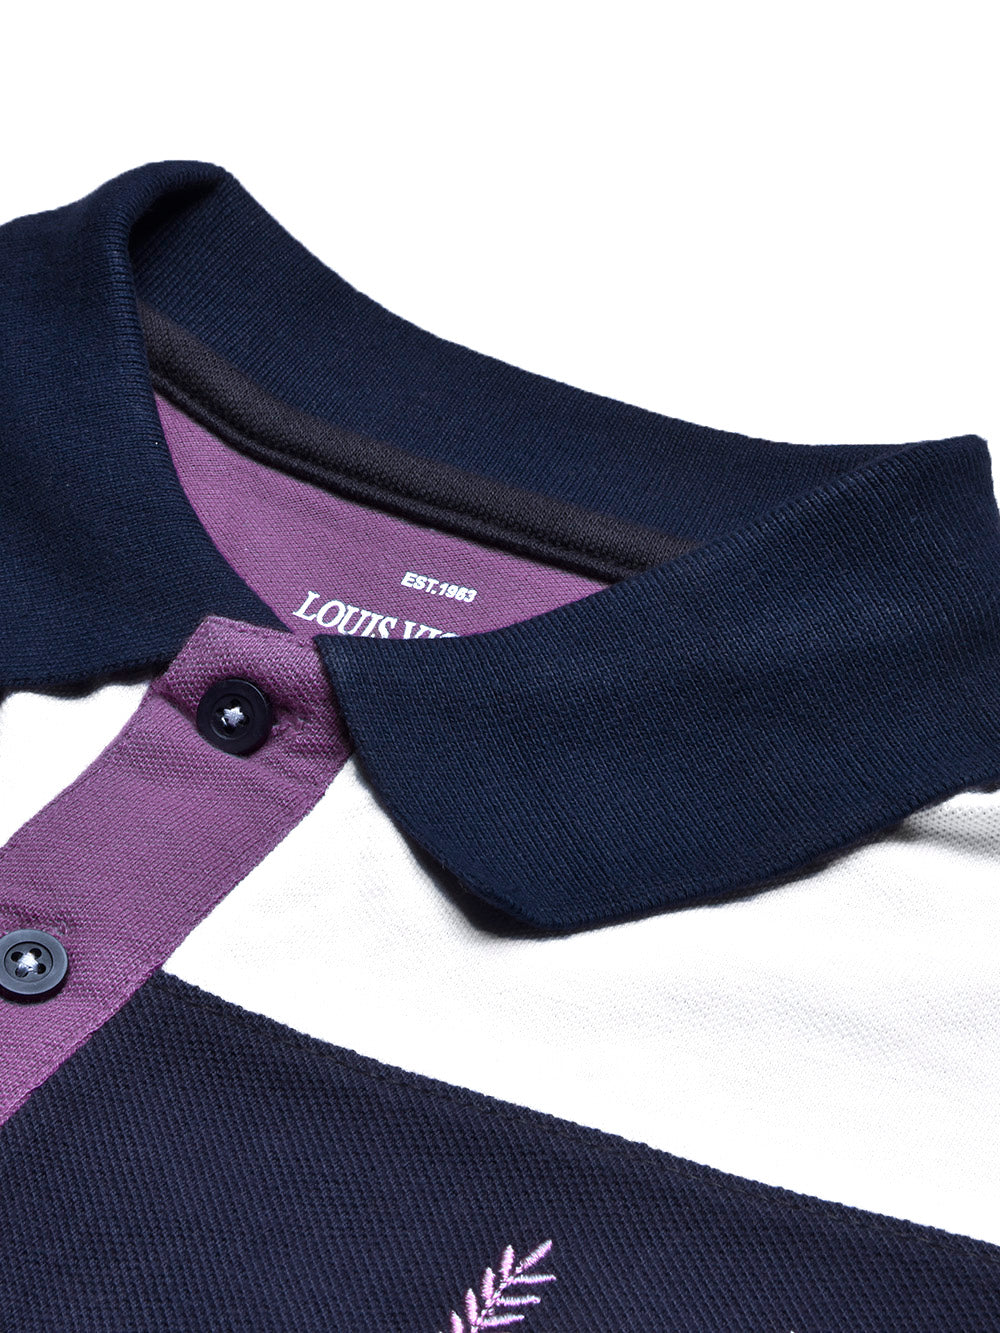 LV Summer Polo Shirt For Men-Purple with Navy & White Panel-BE832/BR13071